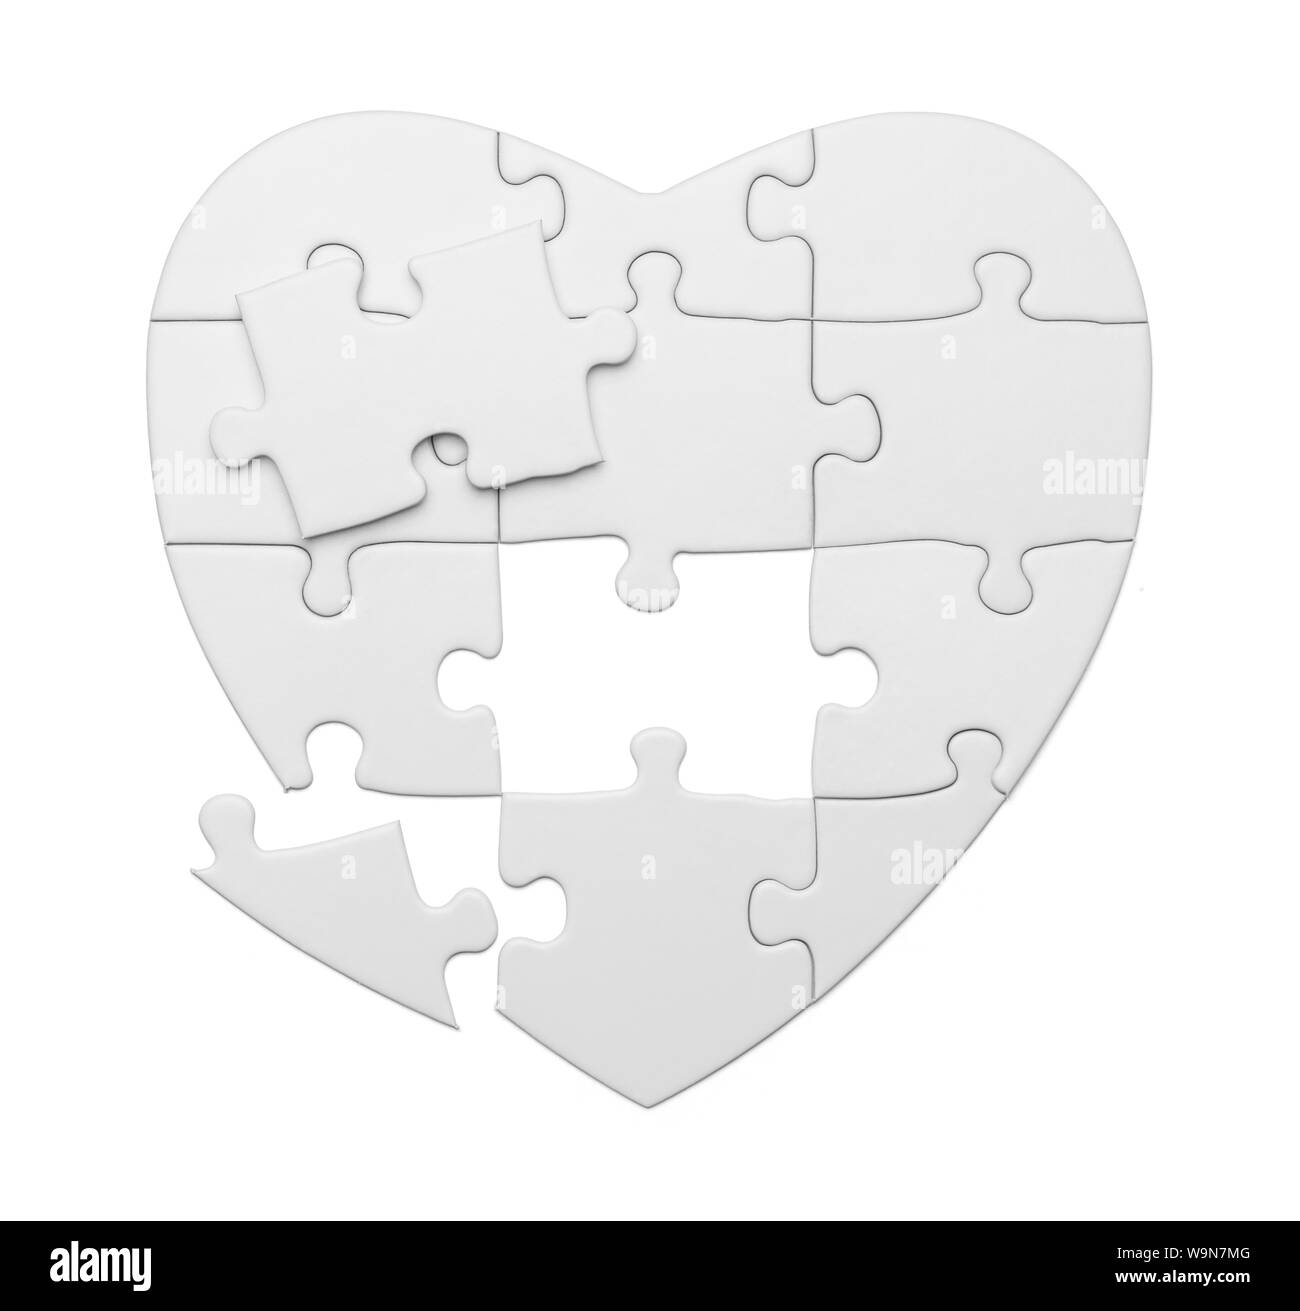 Puzzle Heart Pieces Isolated on White Background. Stock Photo